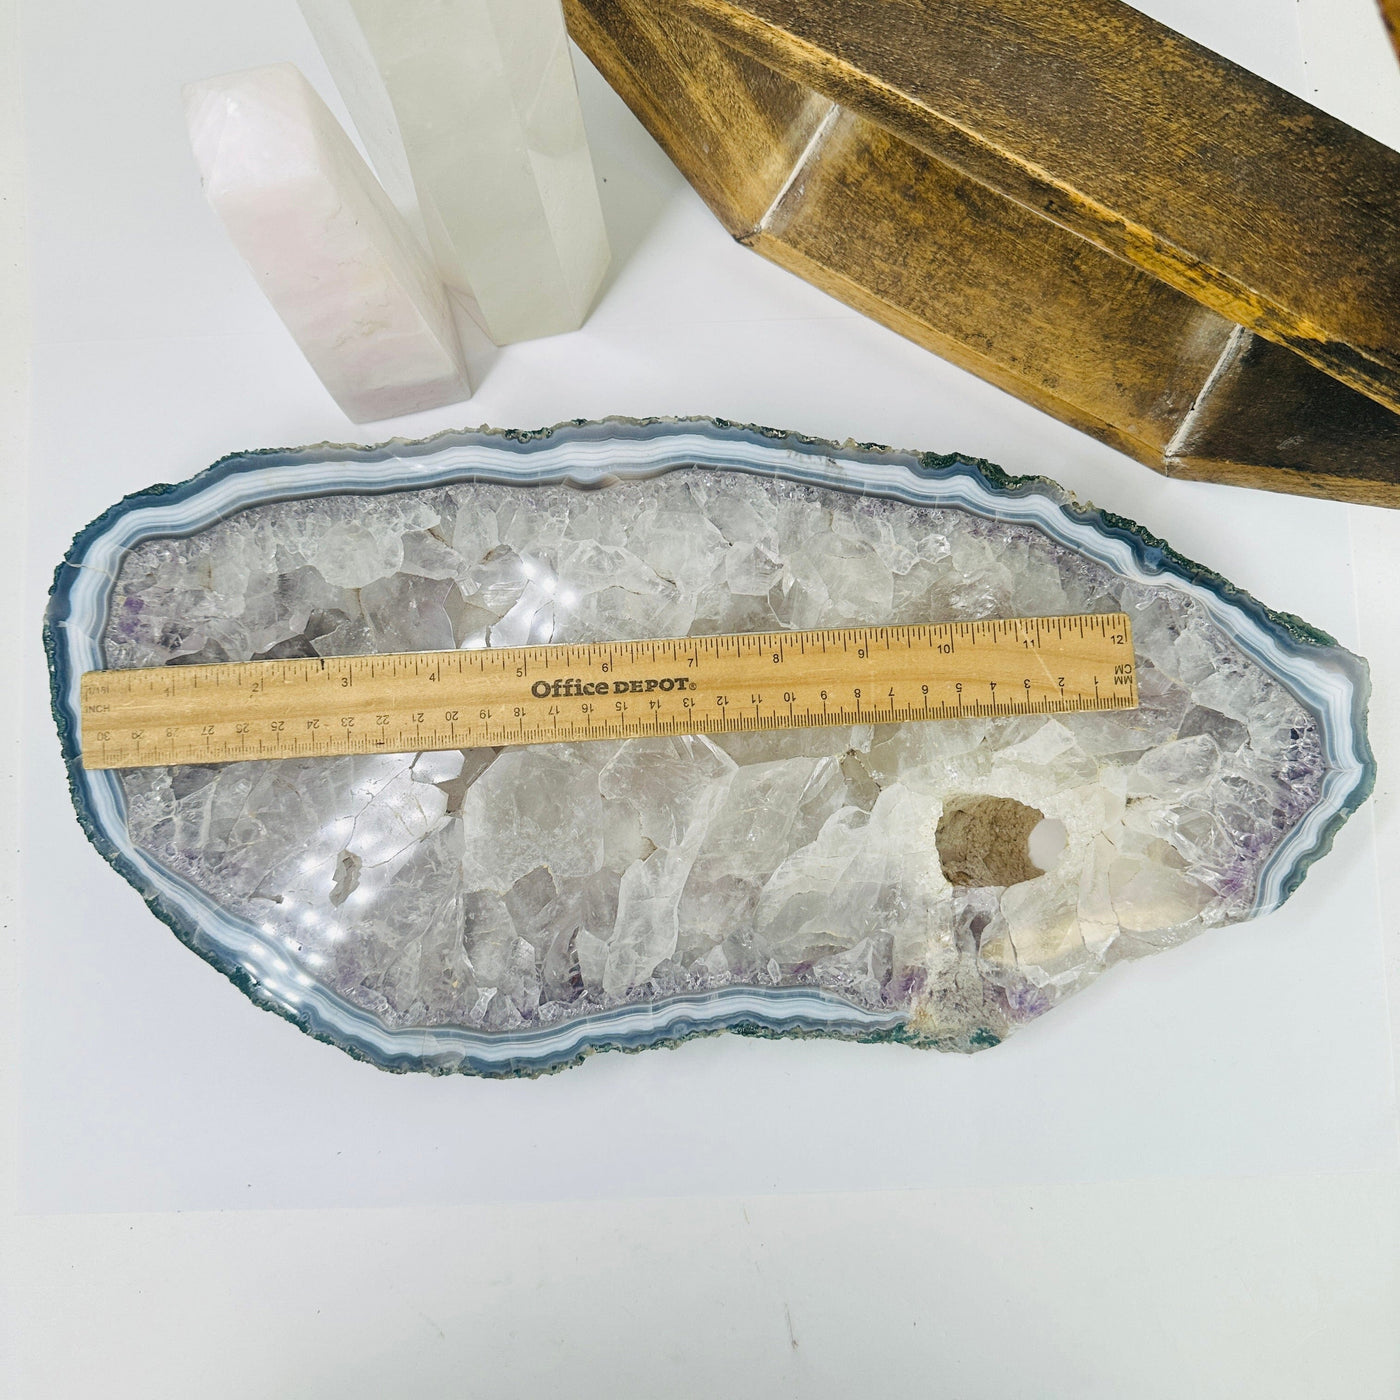 amethyst platter next to a ruler for size reference